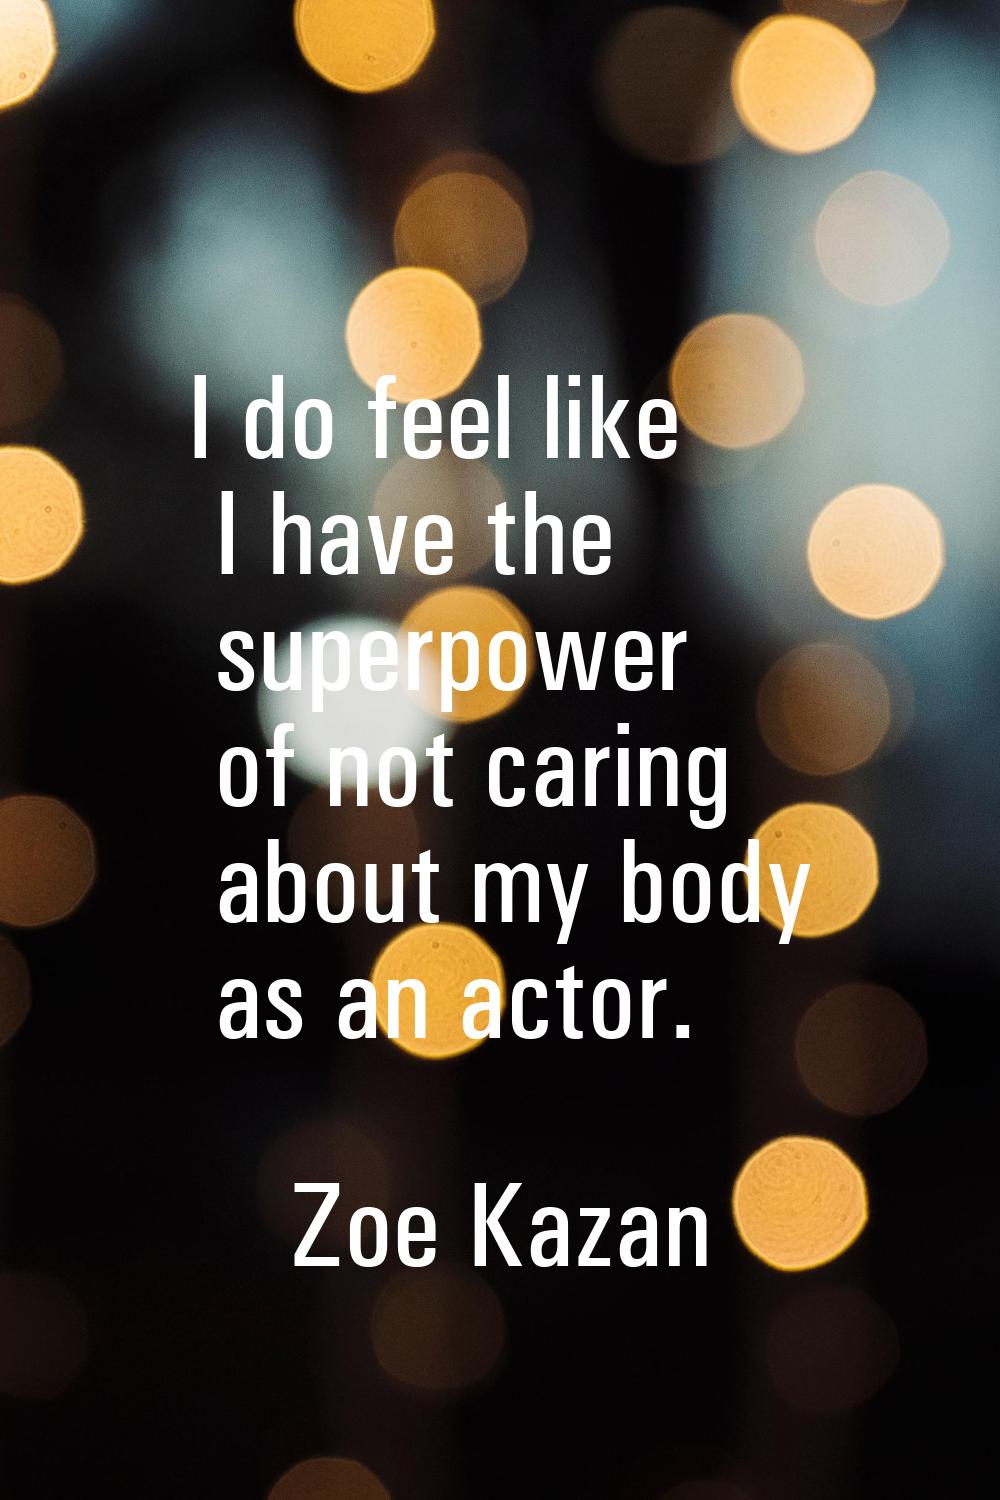 I do feel like I have the superpower of not caring about my body as an actor.